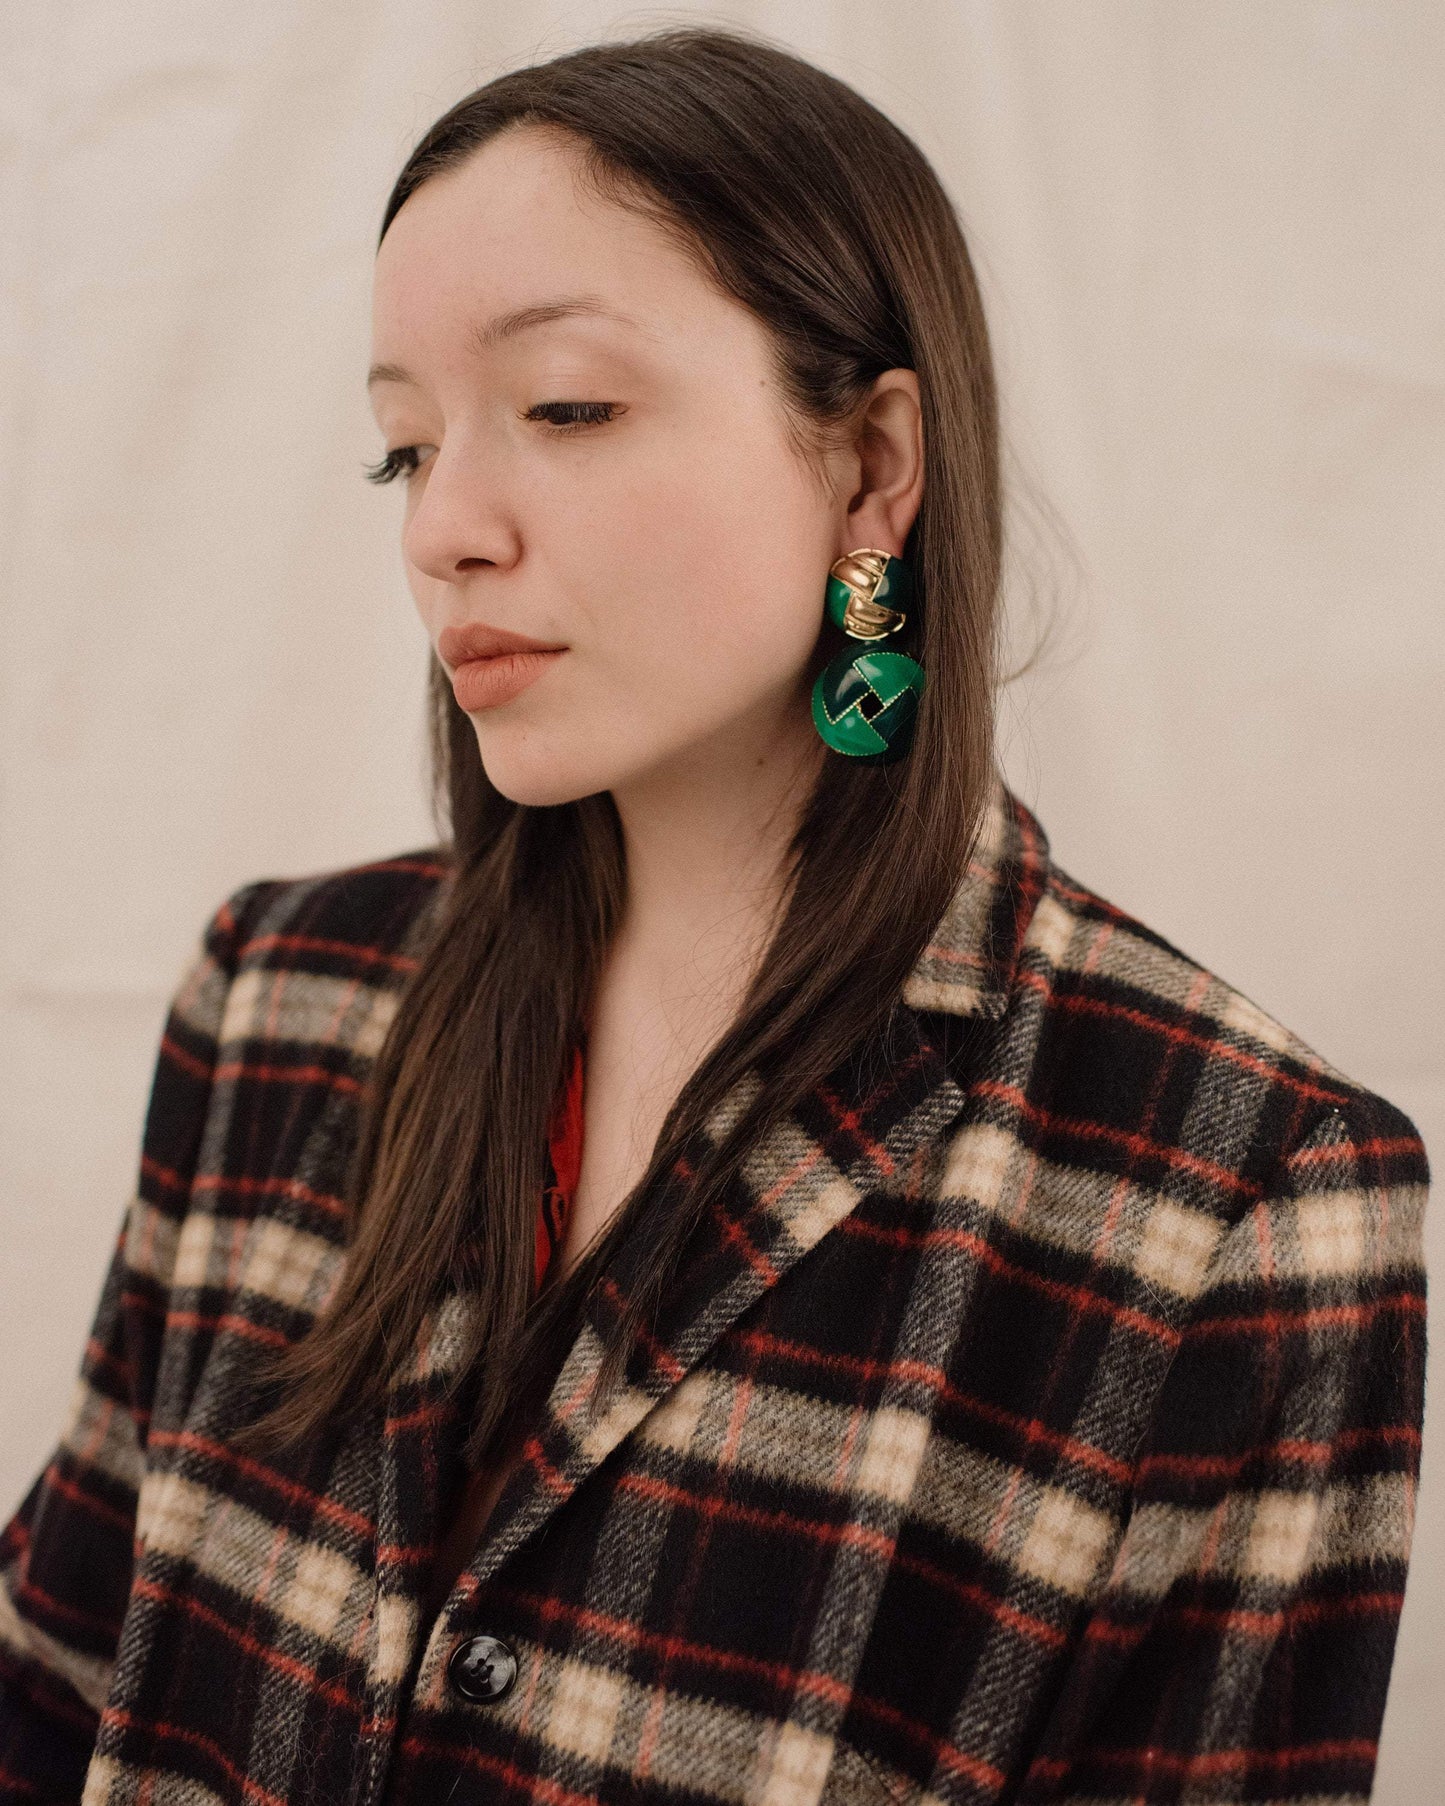 Green and Gold Chunky Statement Earrings - Closed Caption | Shop Vintage + Handmade. Always Sustainable. Never Wasteful.